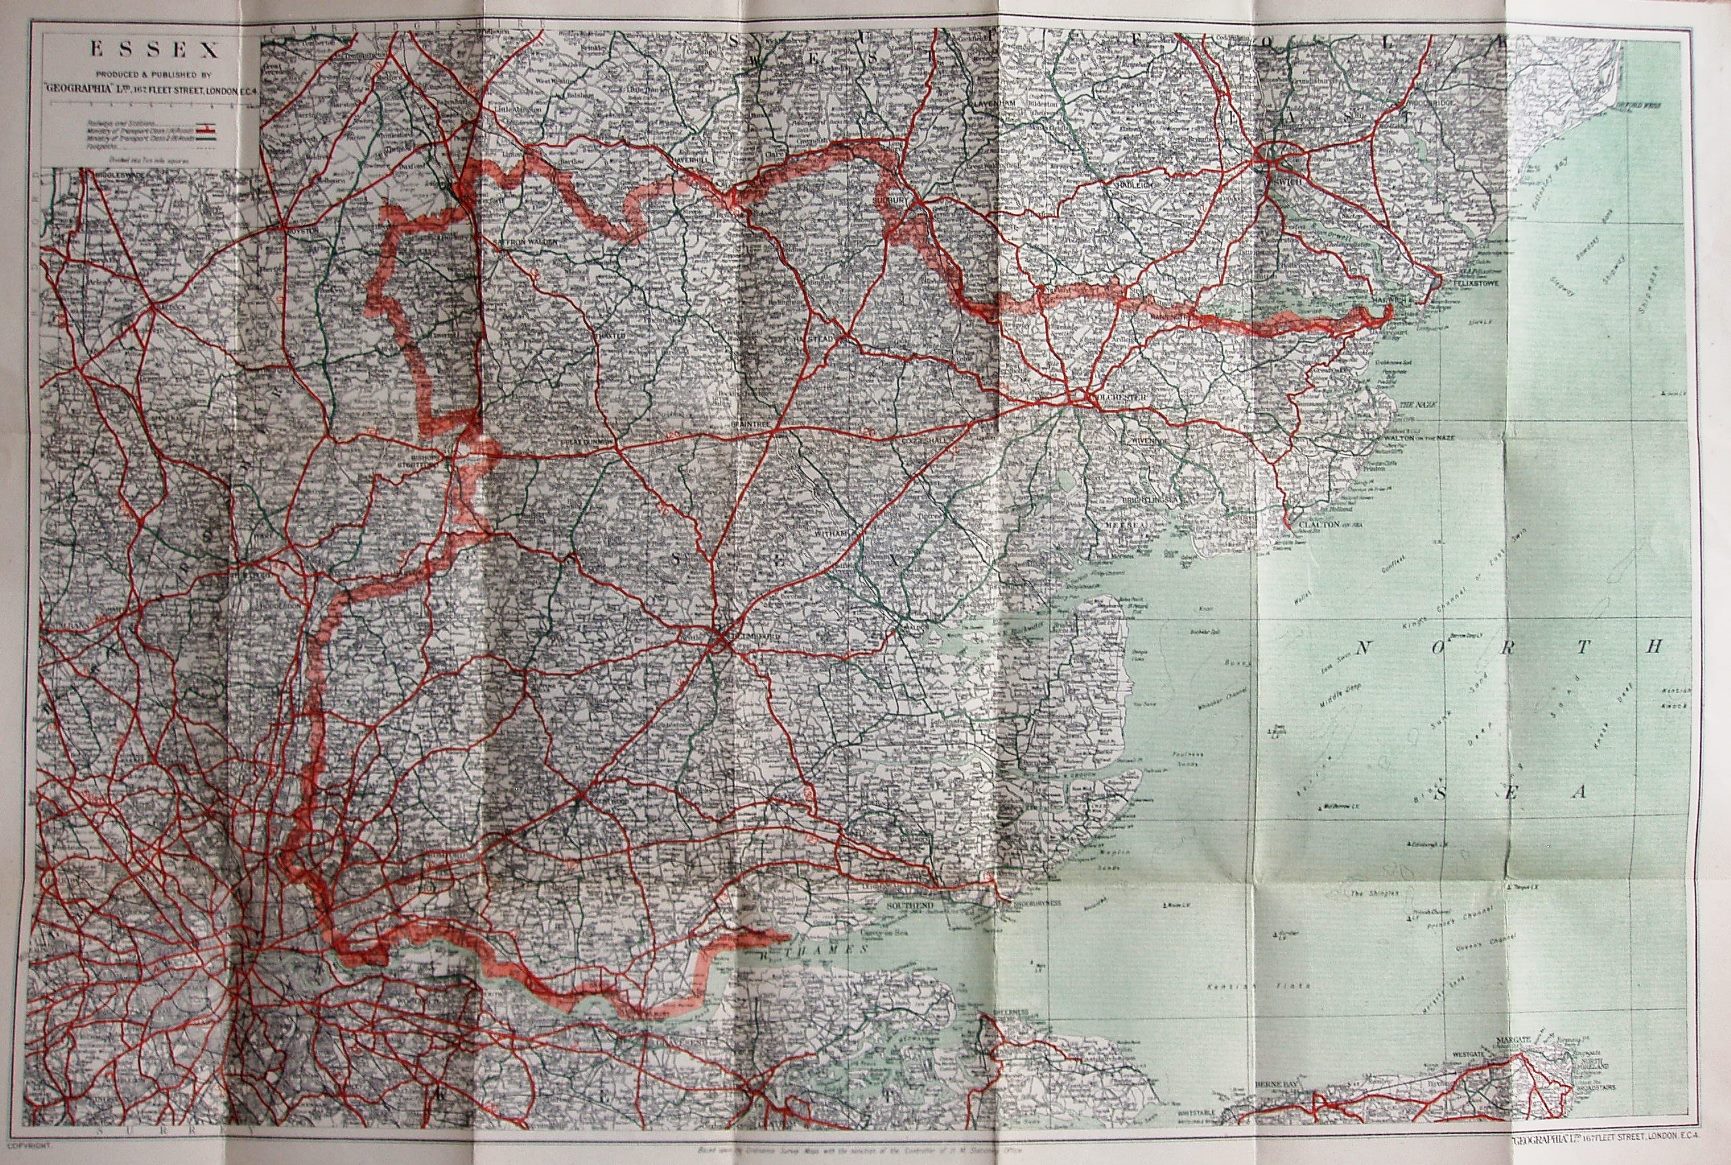 Geographia Large Scale Road Map of Essex, c1944